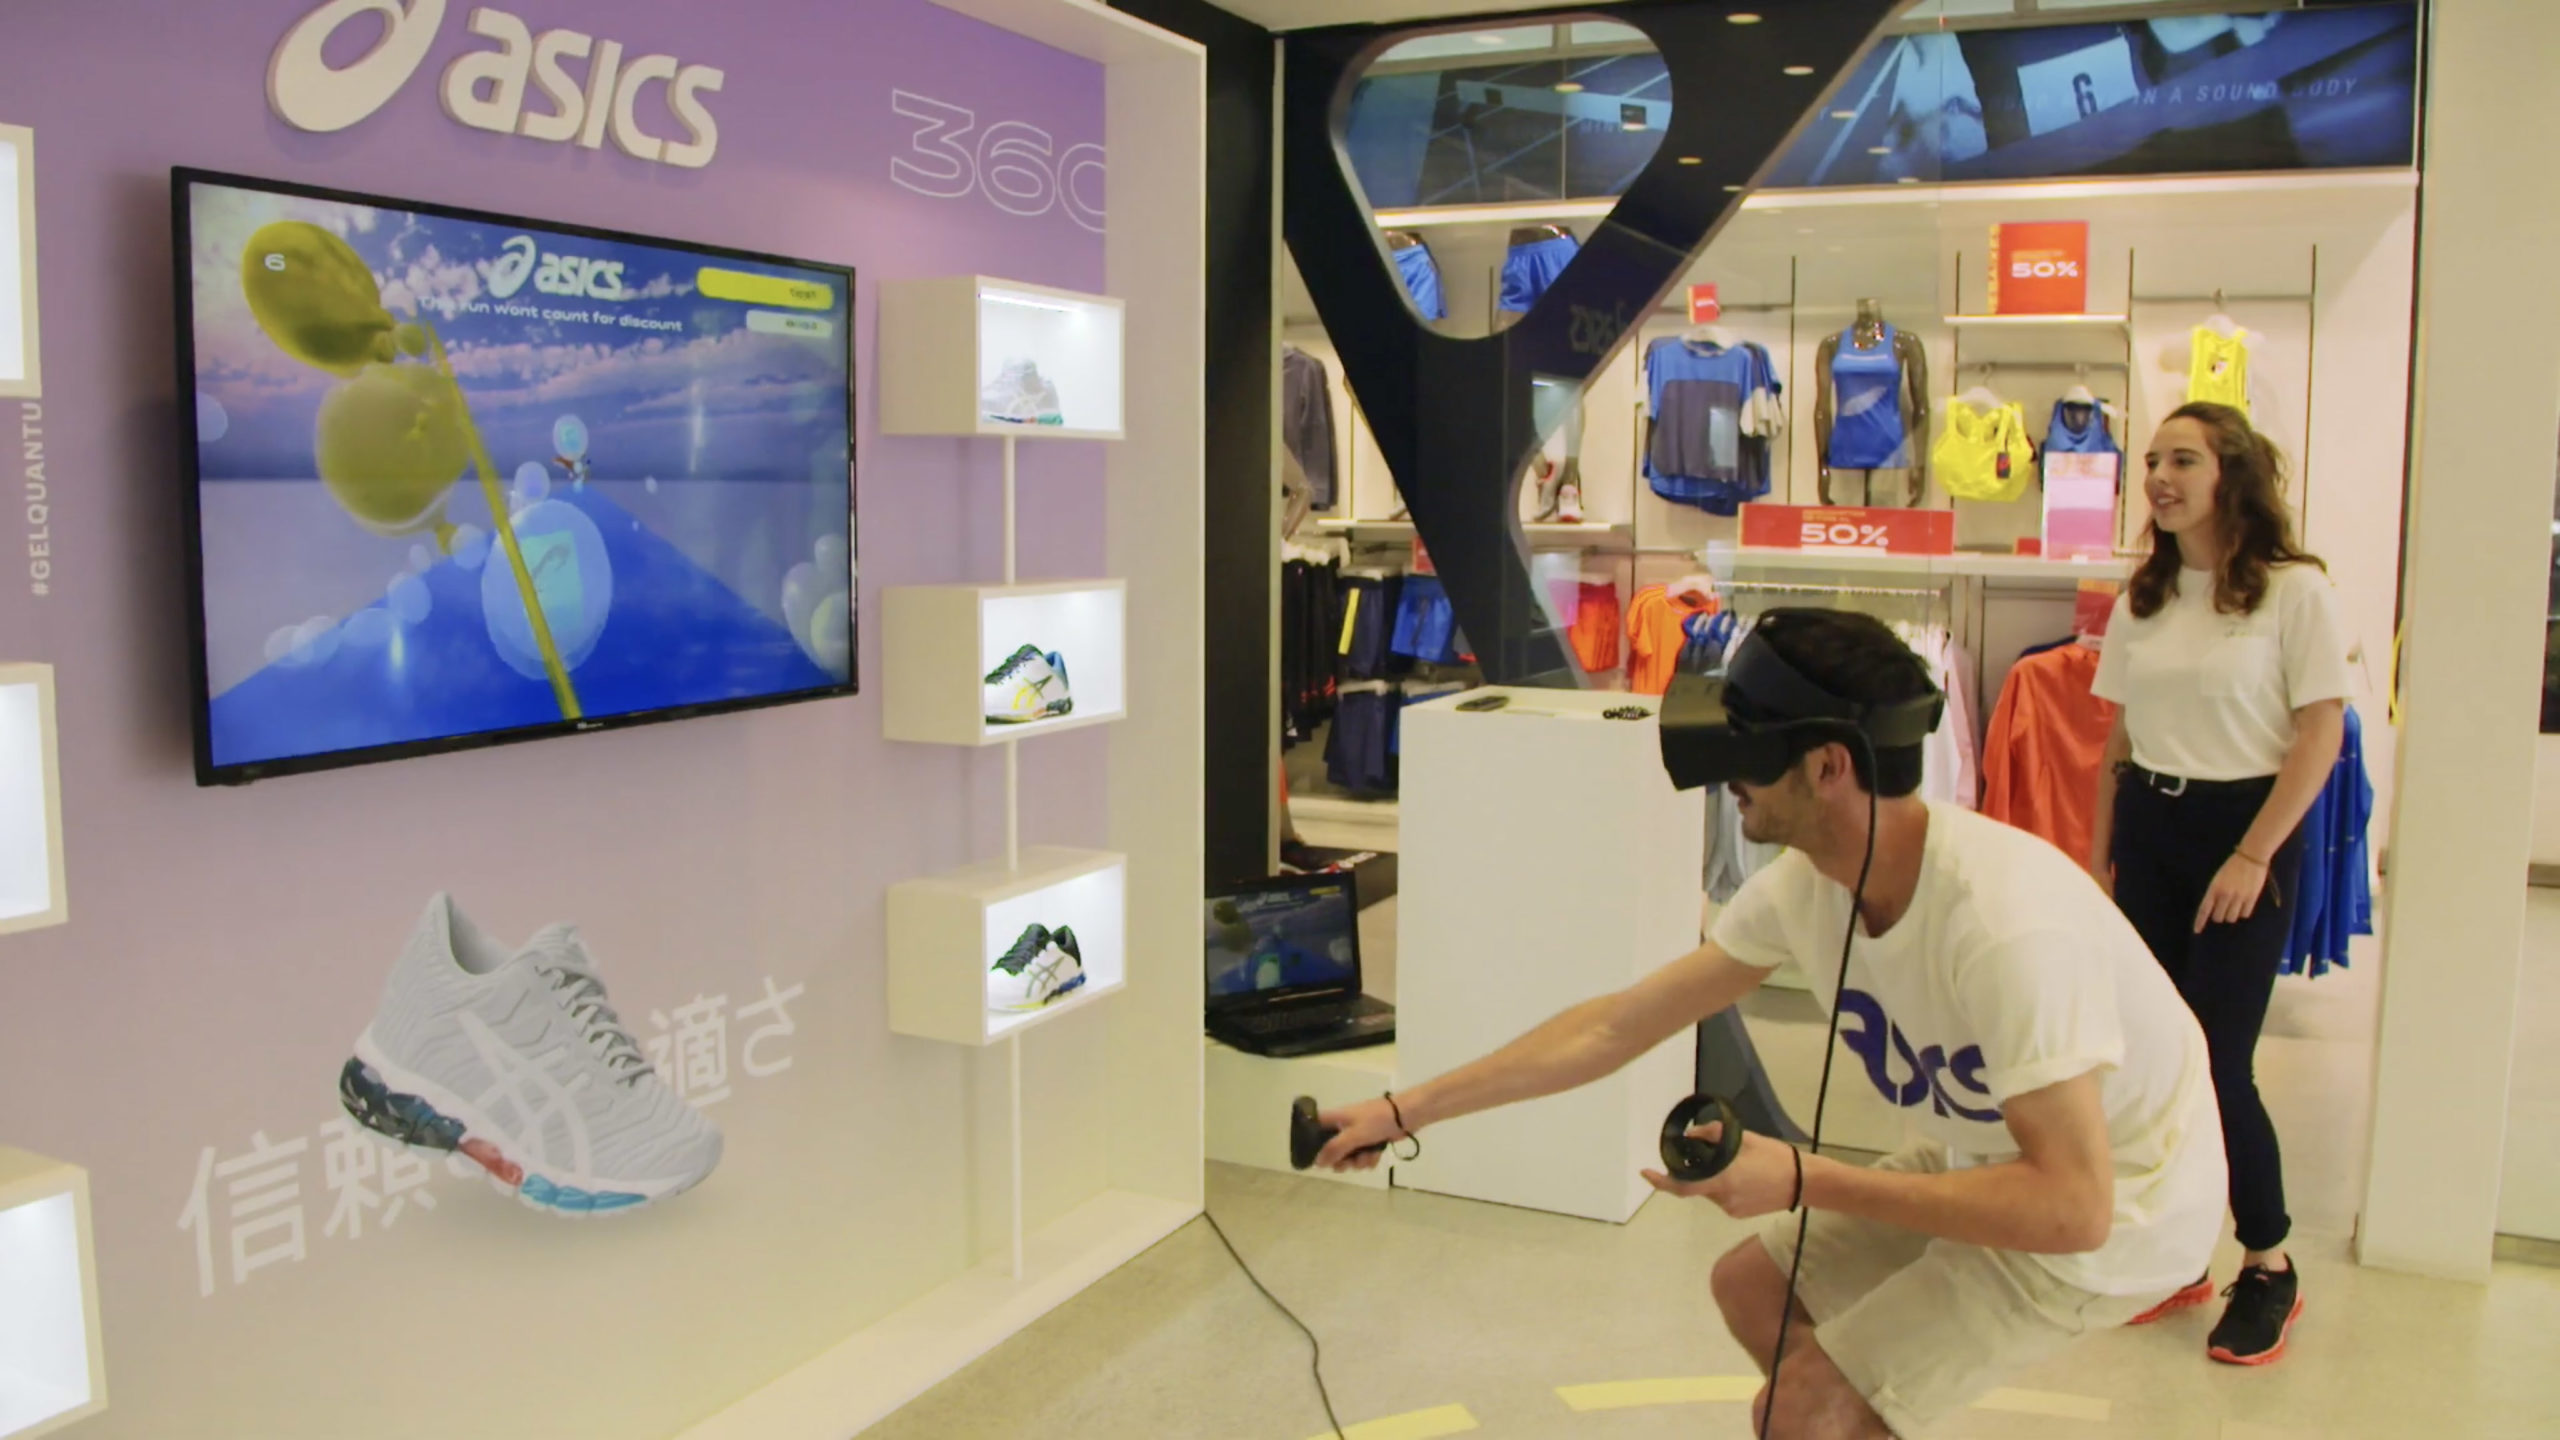 A client playing a VR game in front of a shelf with Asics shoes